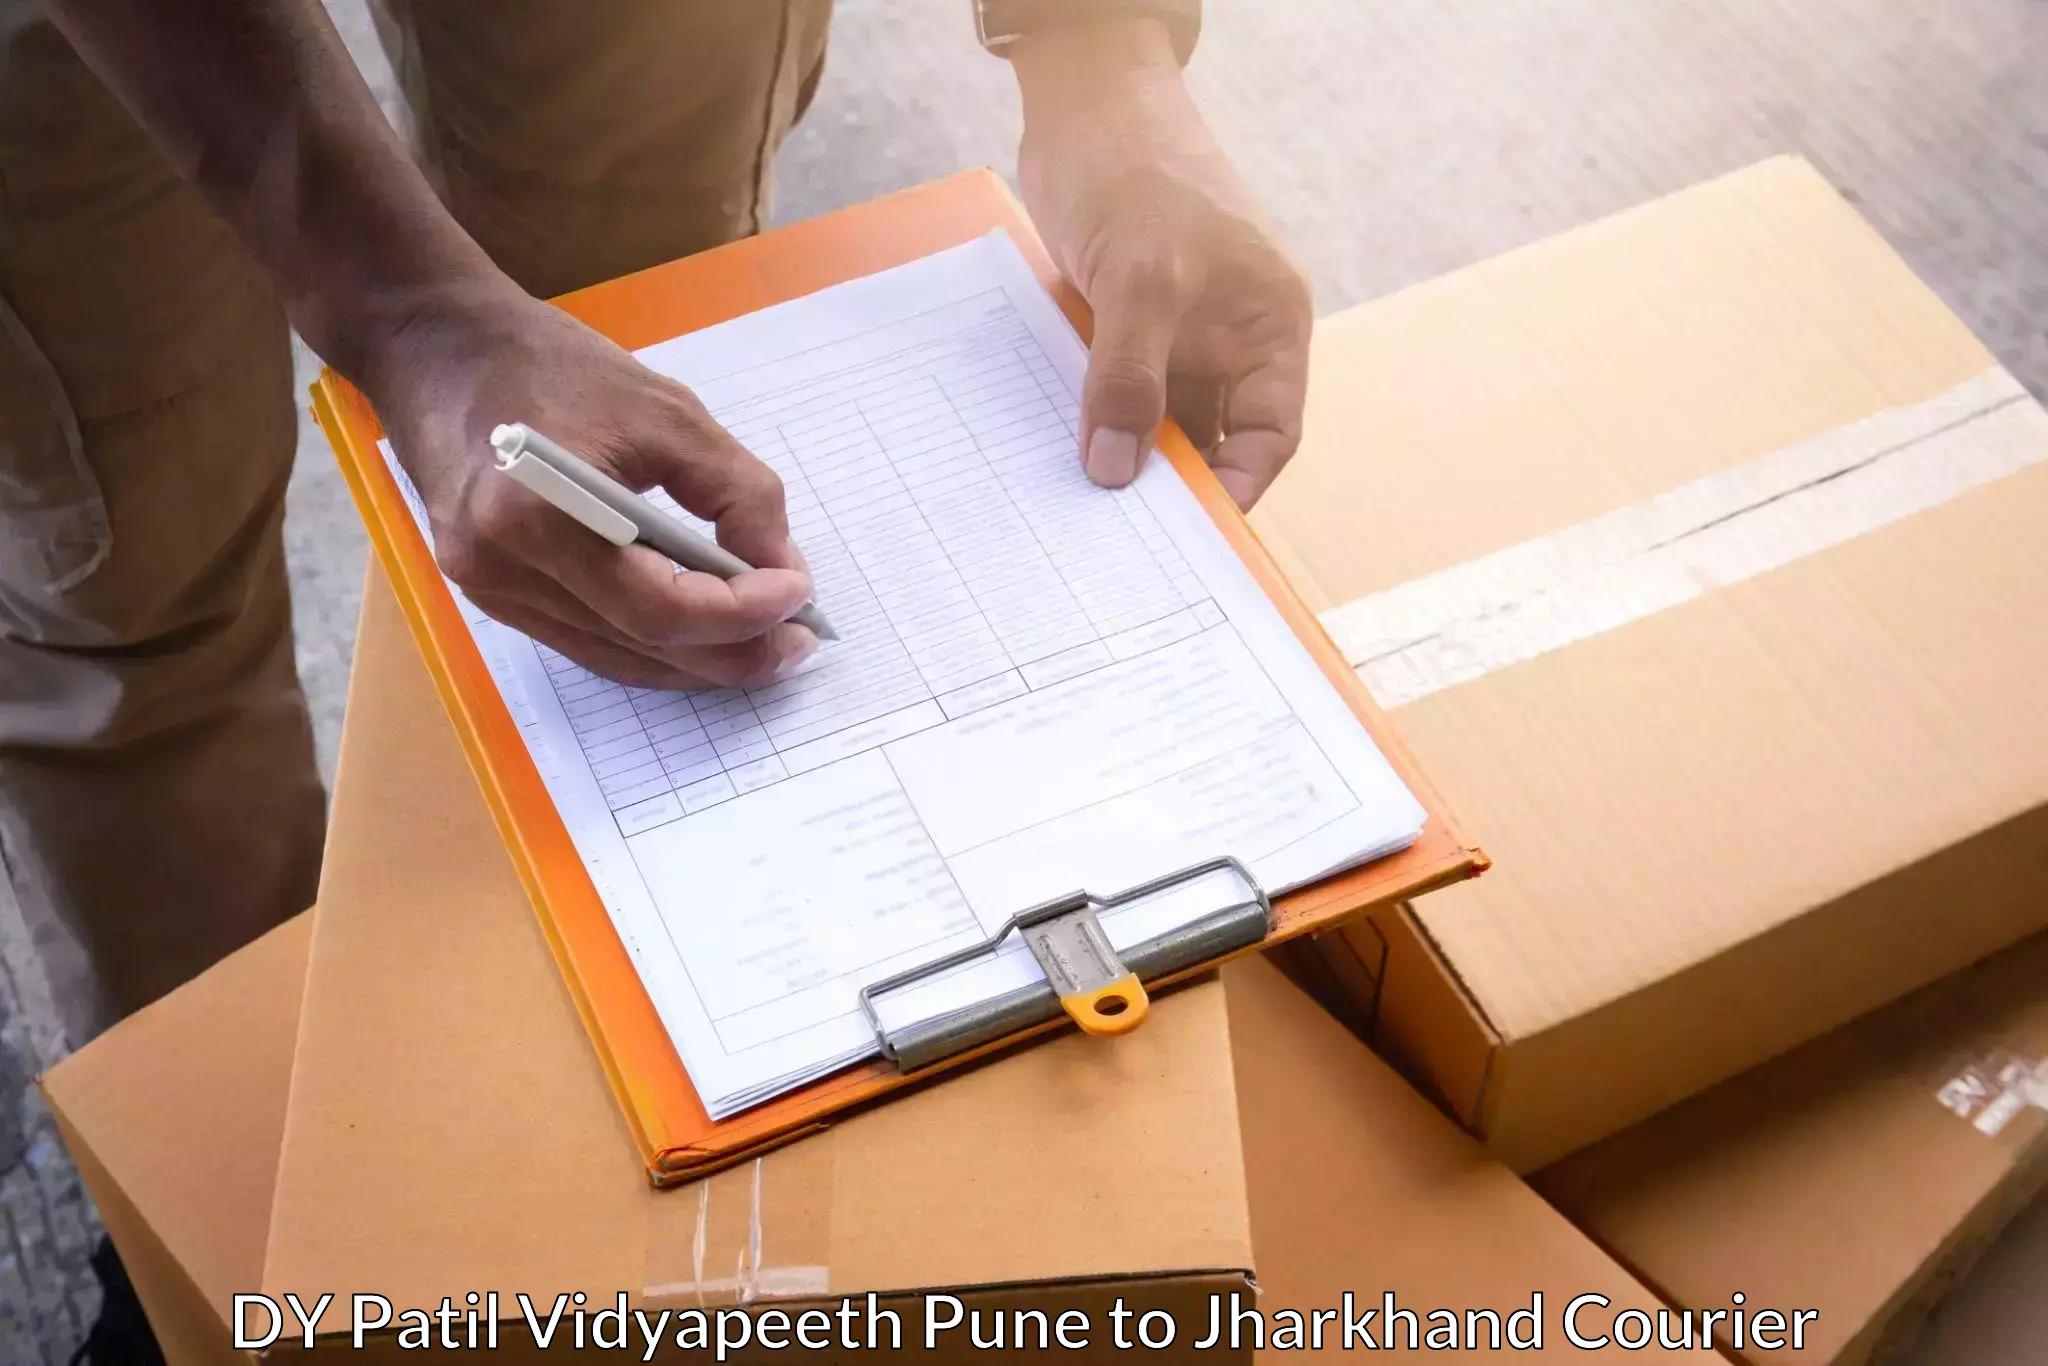 Reliable freight solutions in DY Patil Vidyapeeth Pune to Kolebira